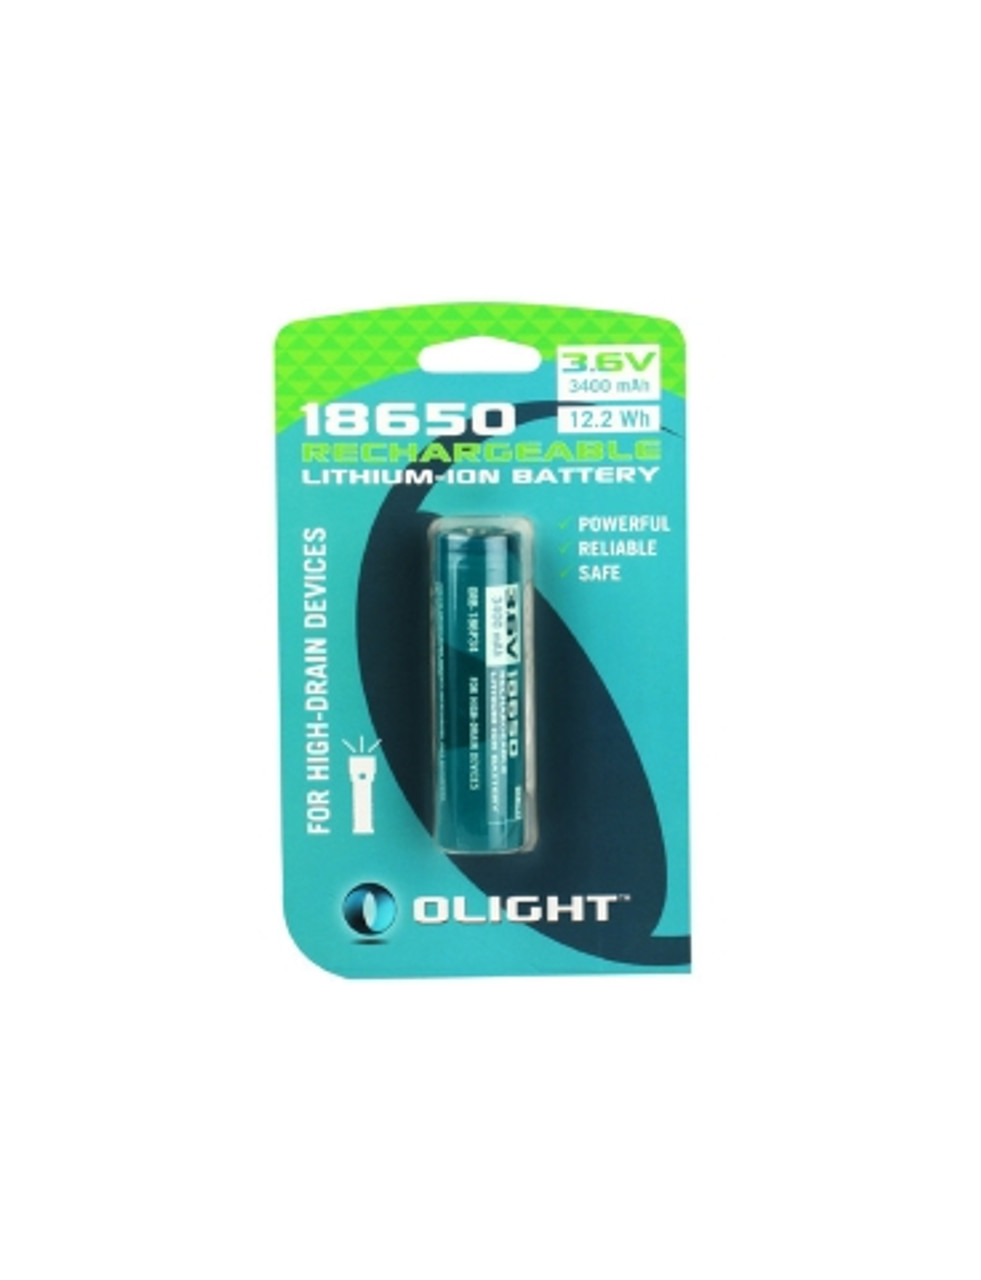 Olight 18650 Li Ion Rechargeable Battery | Free Shipping Over $50